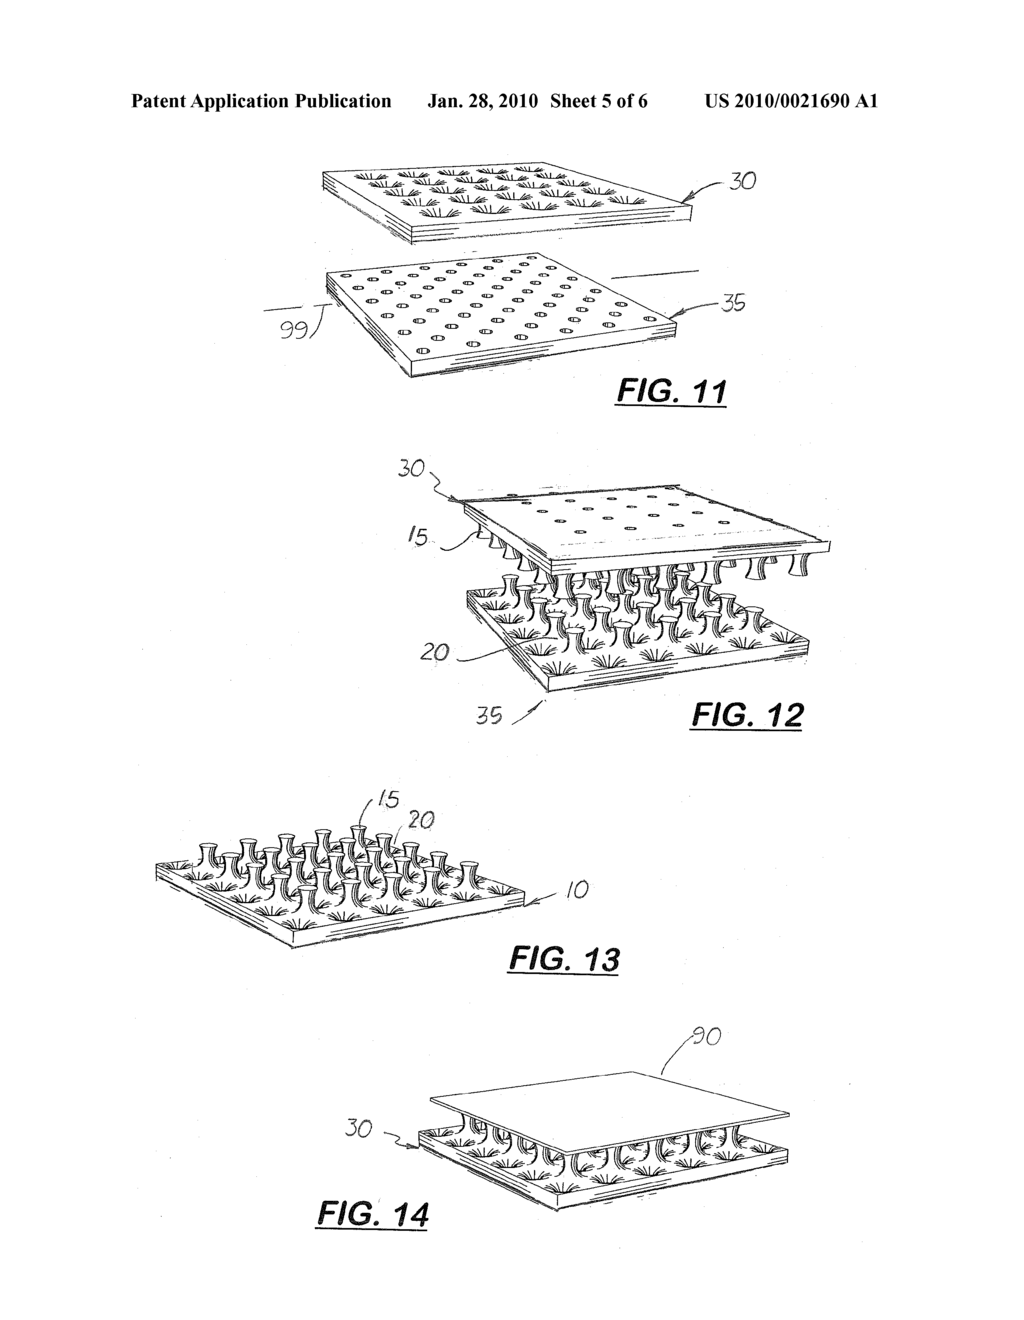 Protective Pad and Method for Manufacturing Foam Structures with Uniform Pegs and Voids - diagram, schematic, and image 06